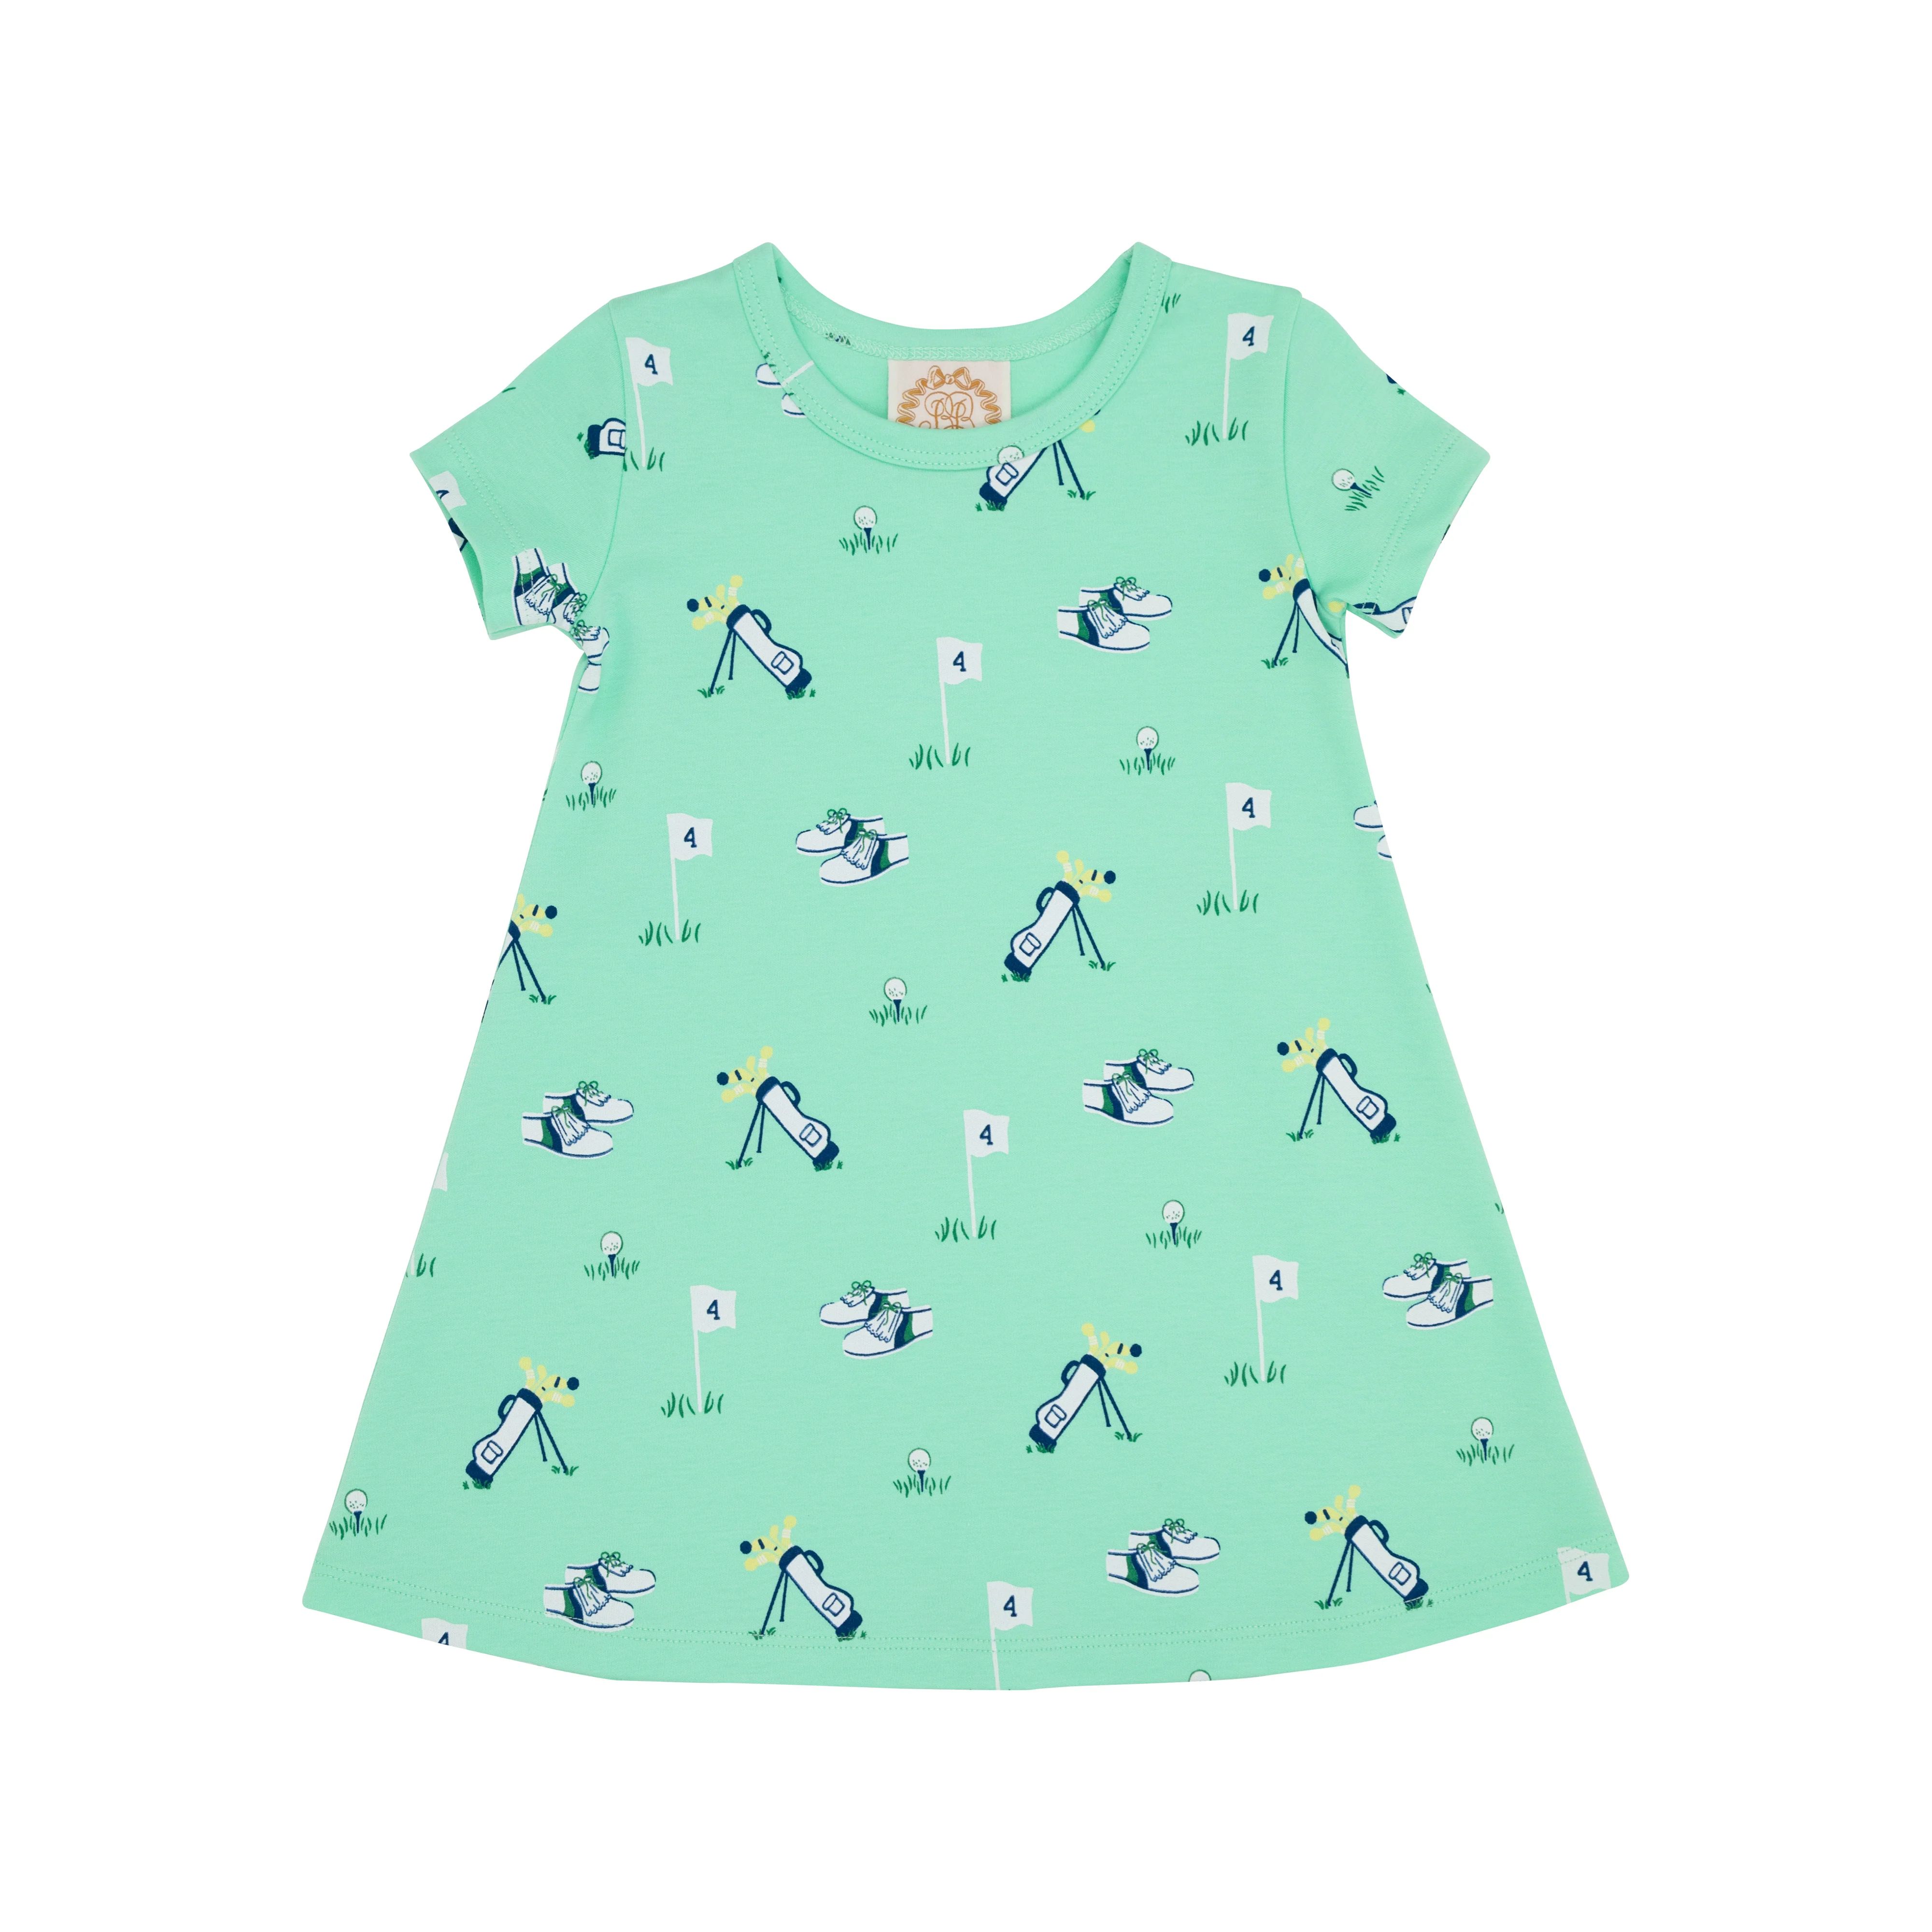 Polly Play Dress - Mulligans and Manners | The Beaufort Bonnet Company